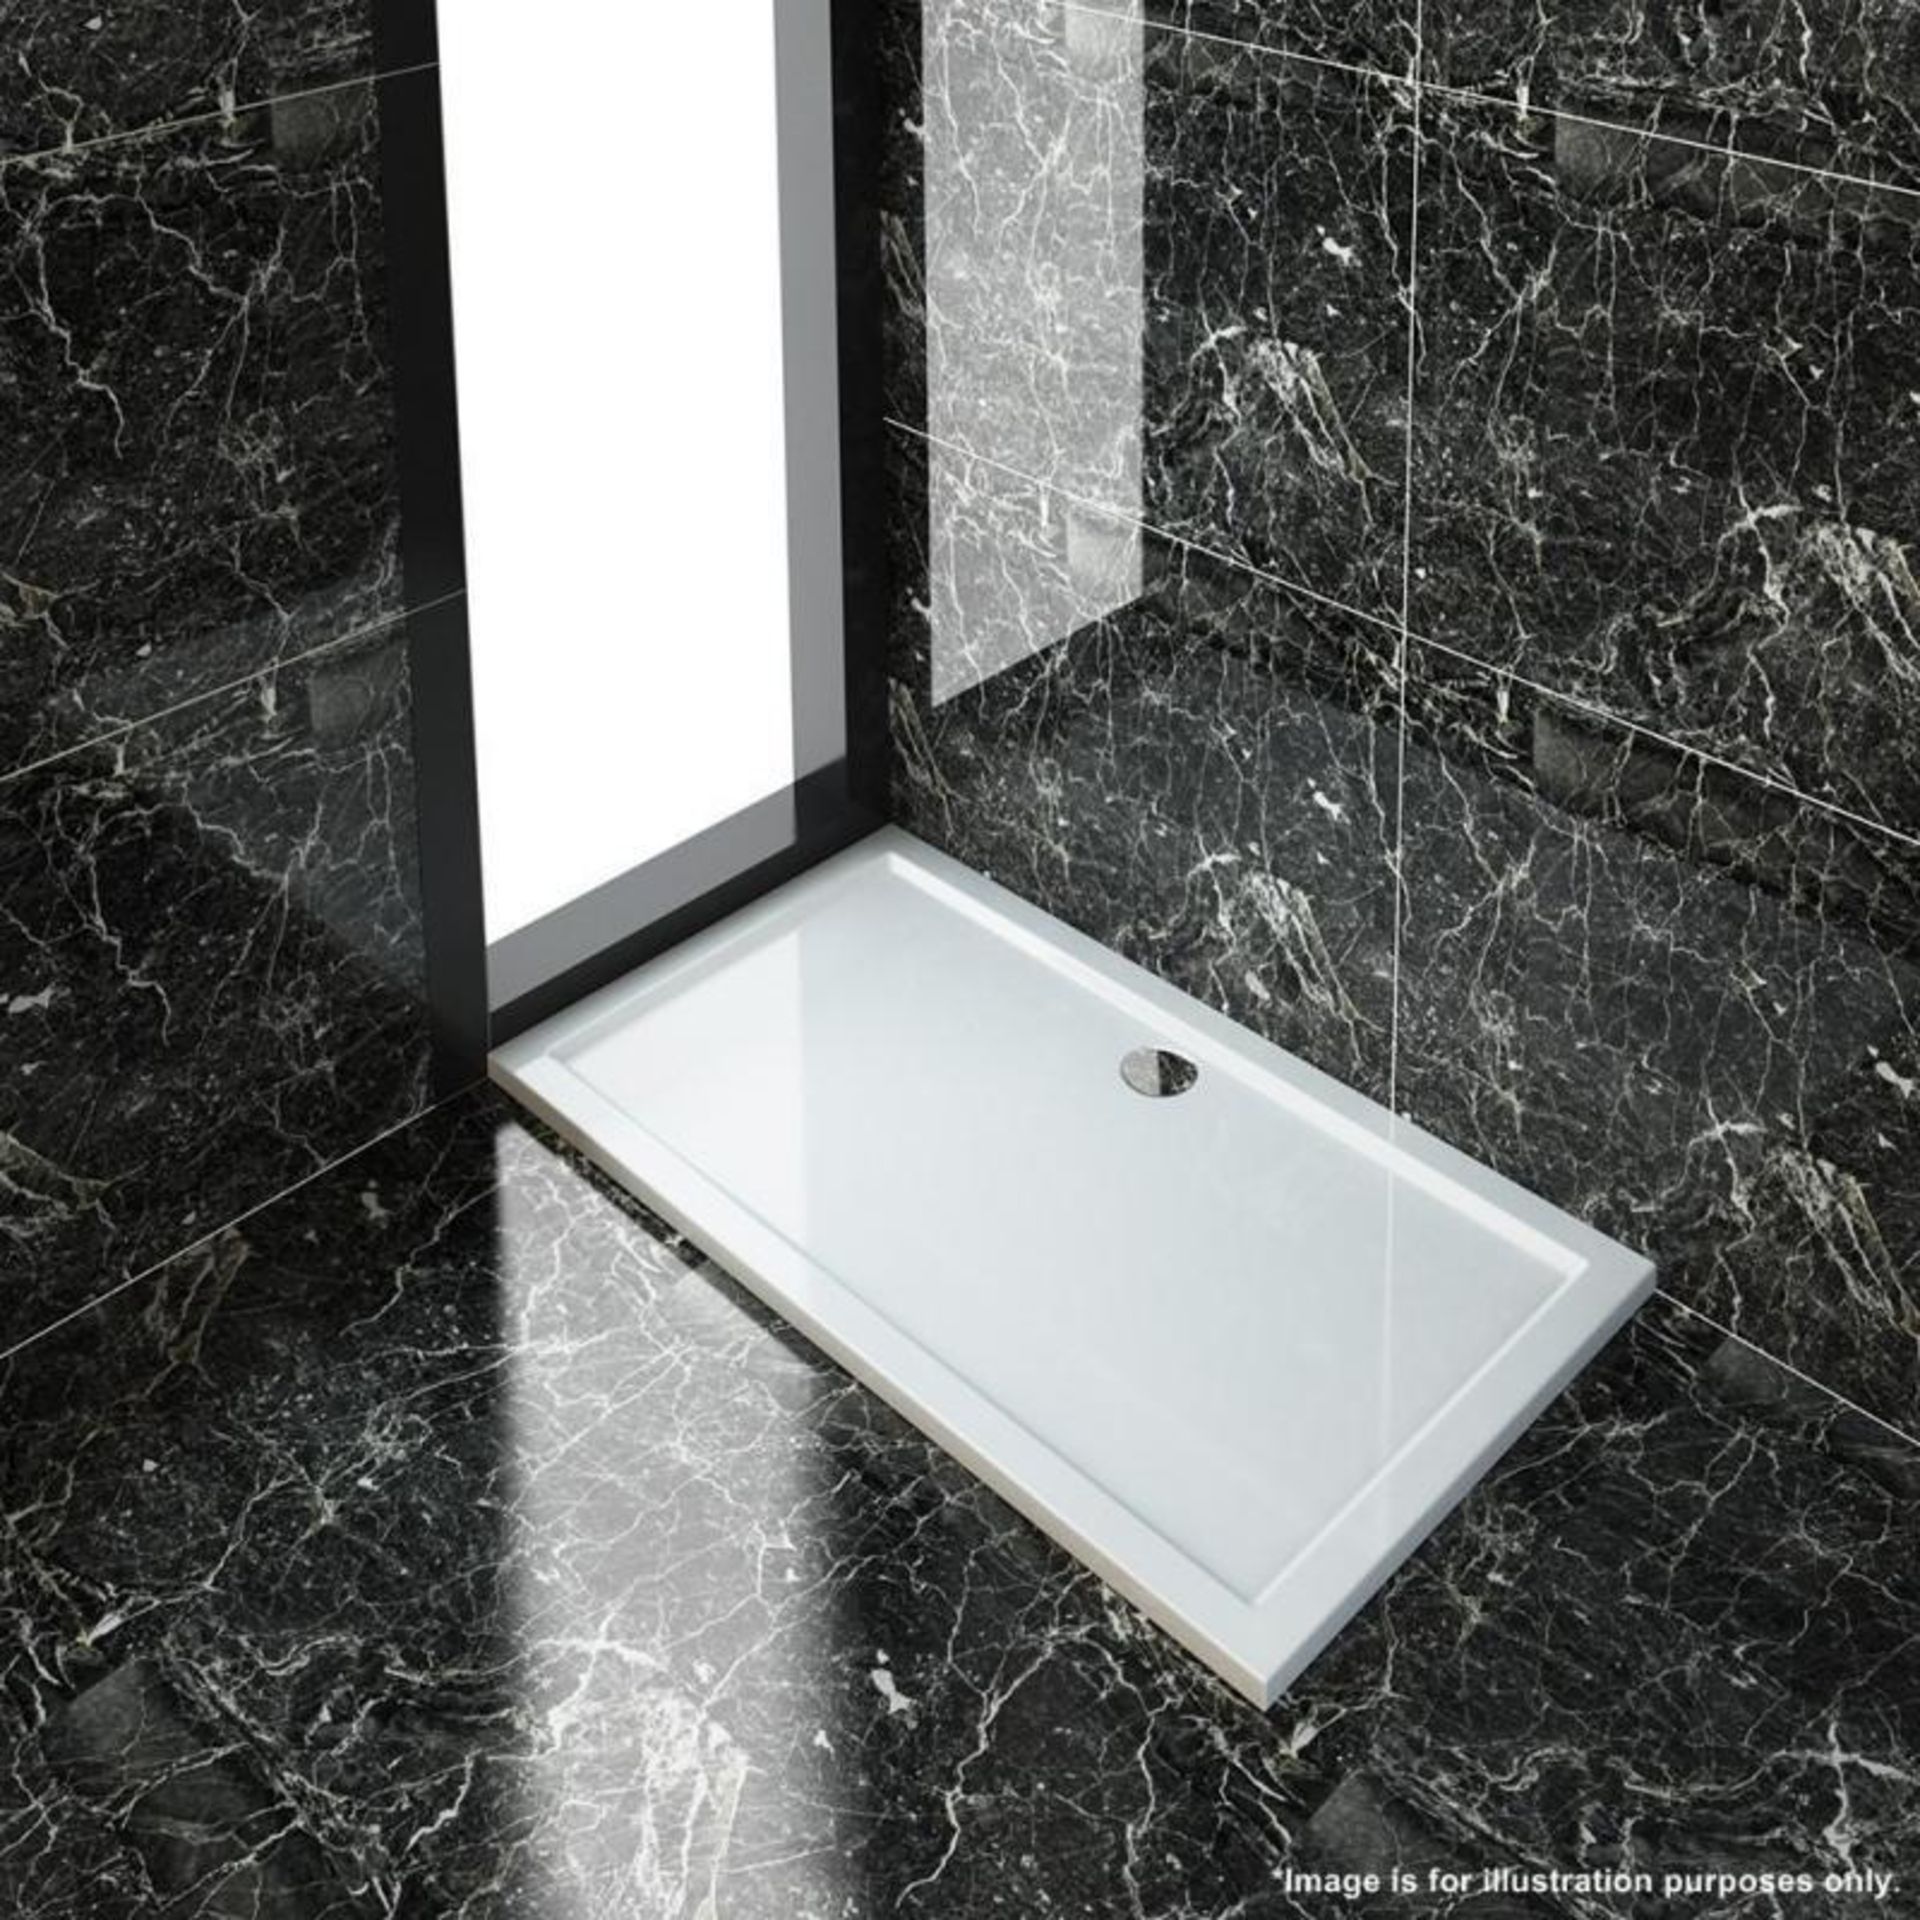 1 x Rectangular Pearlstone Shower Tray (SRT1480) - Made In UK - Dimensions: 1400 x 800 x 40mm - New